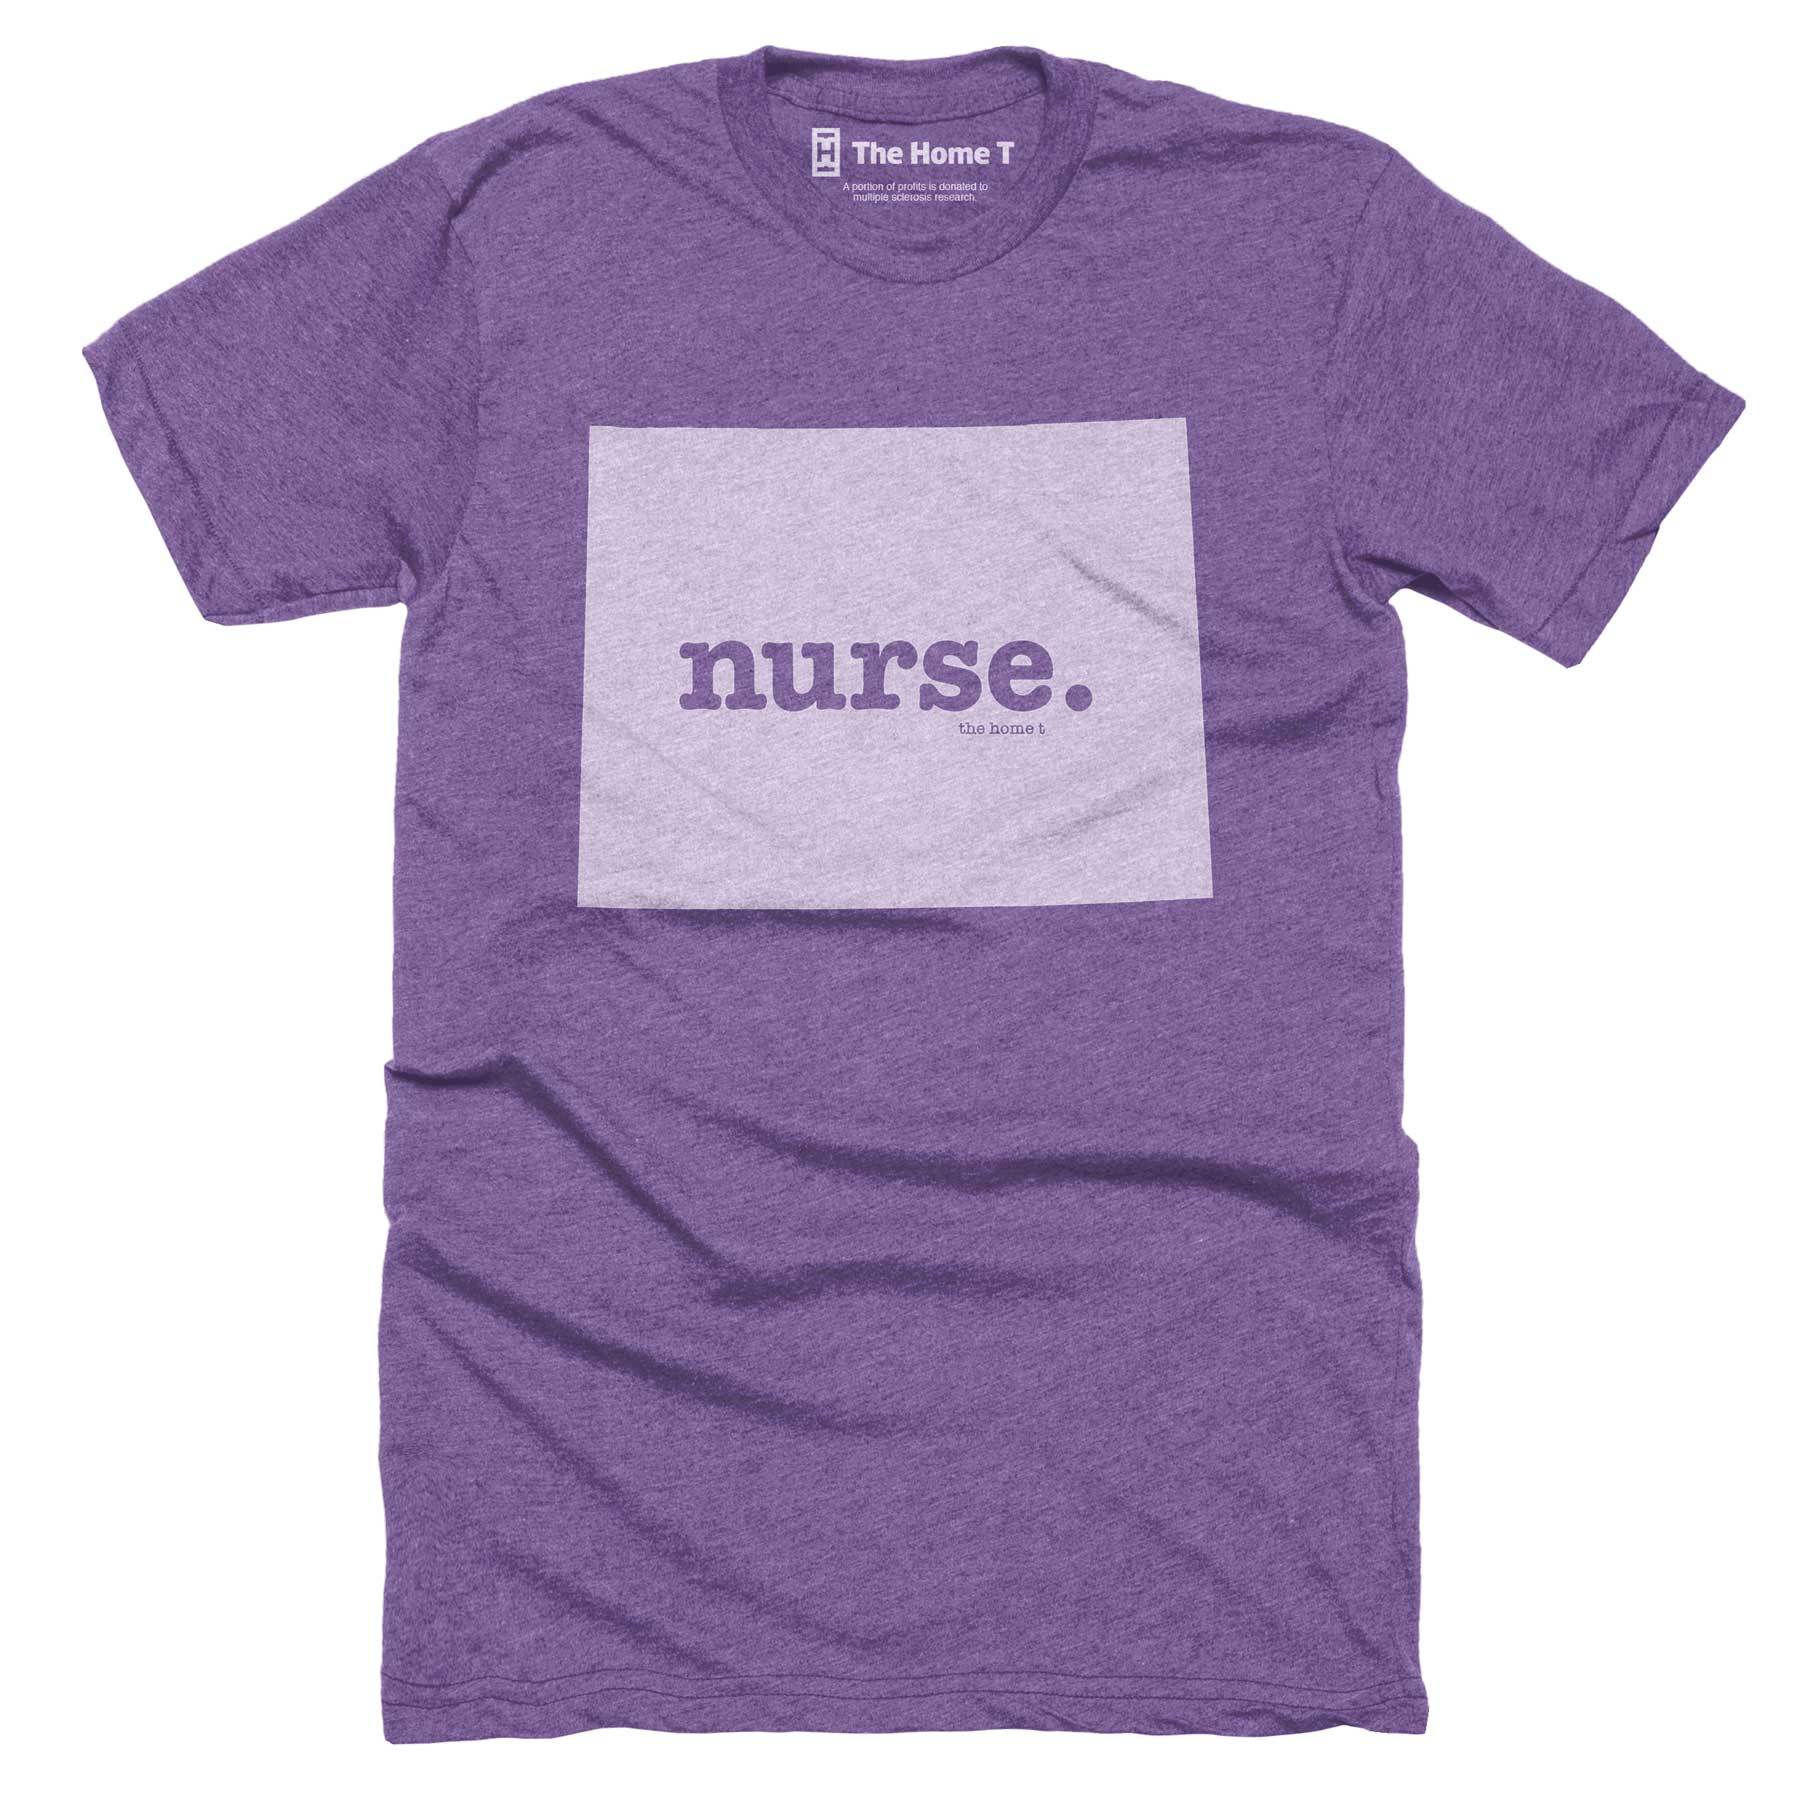 Wyoming Nurse Home T-Shirt Occupation The Home T